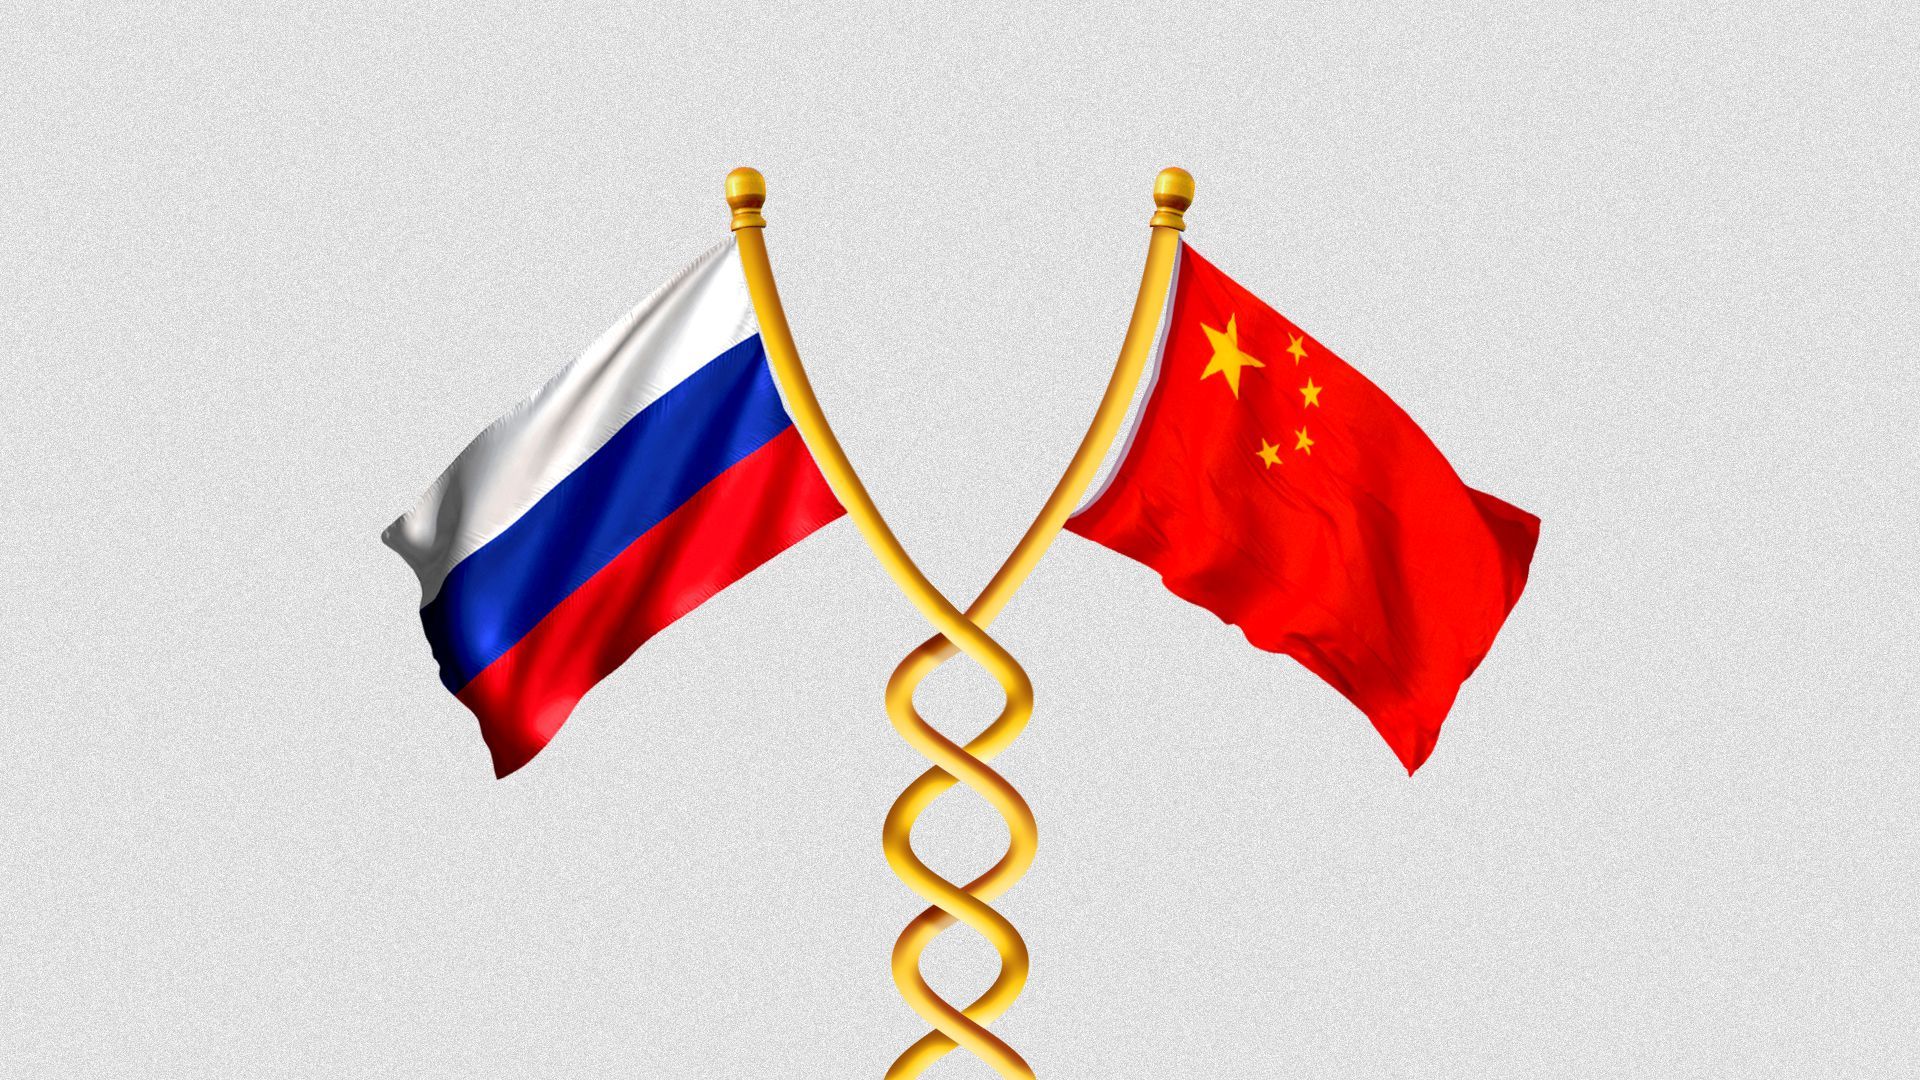 Illustration of the Russian and Chinese flags on poles twisting together